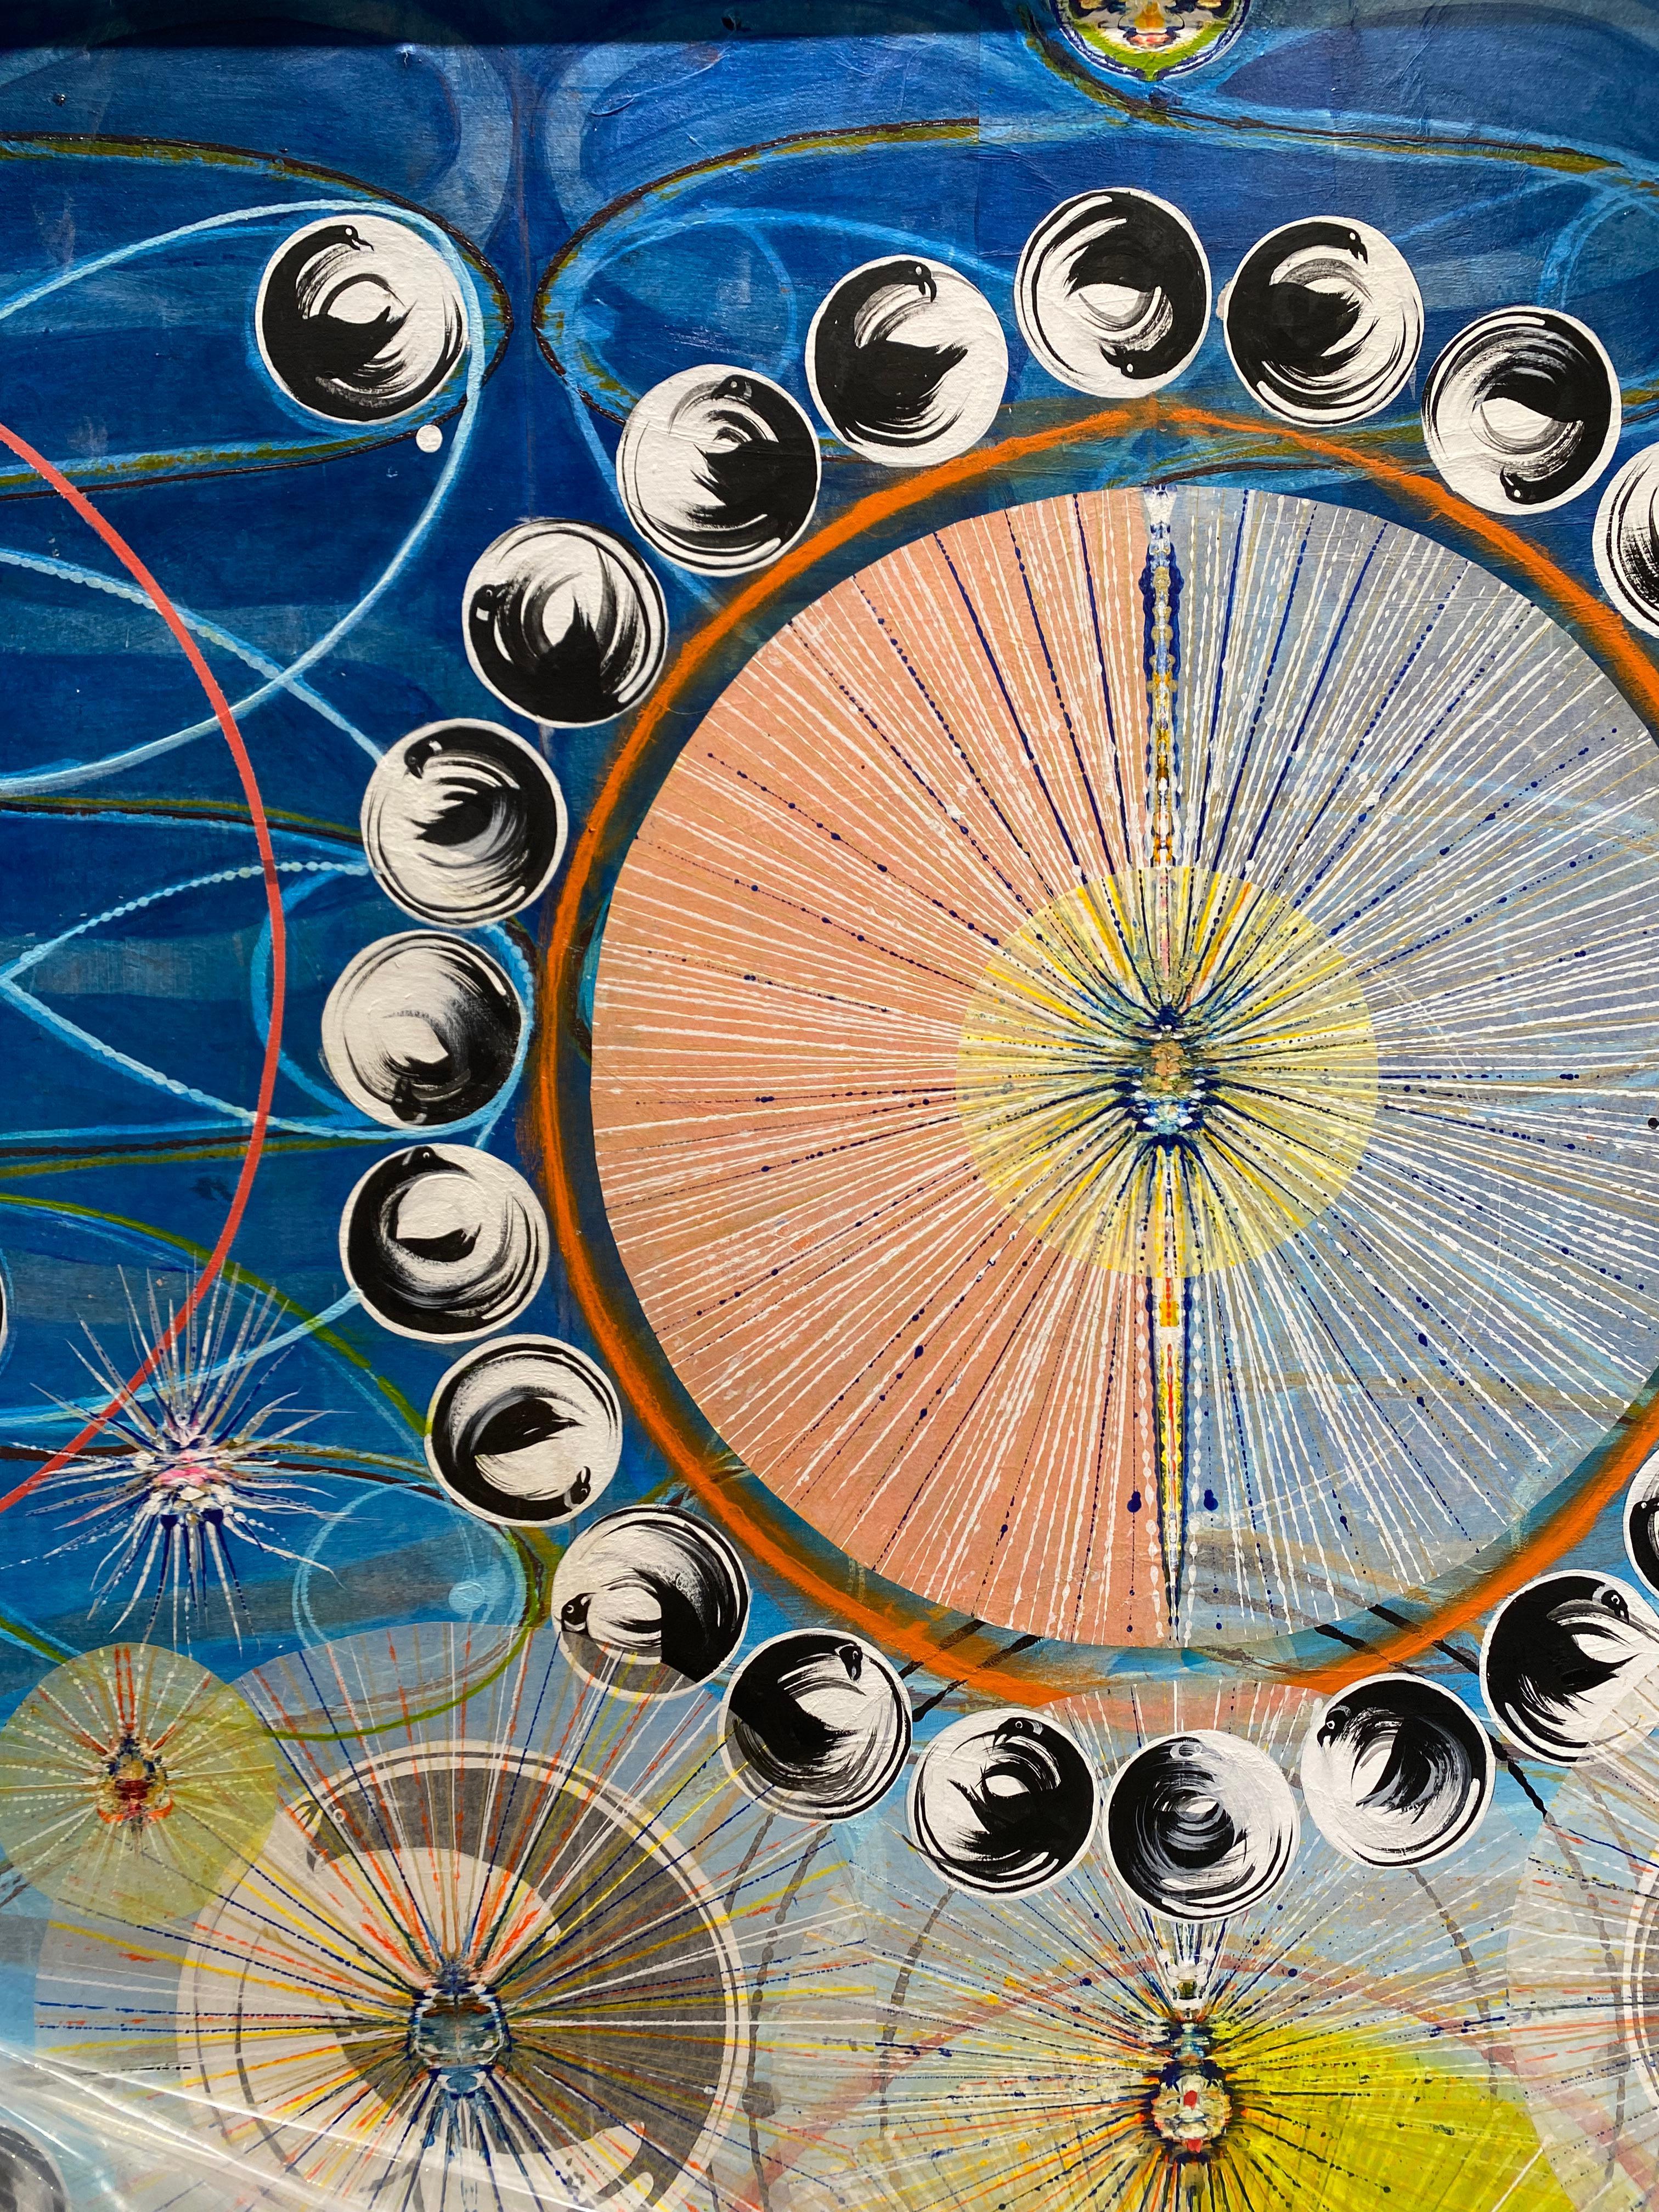 Raven's Wheel, Black and White Circles, Swirling Lines Navy Blue, Pink, Yellow - Painting by Susan Chrysler White